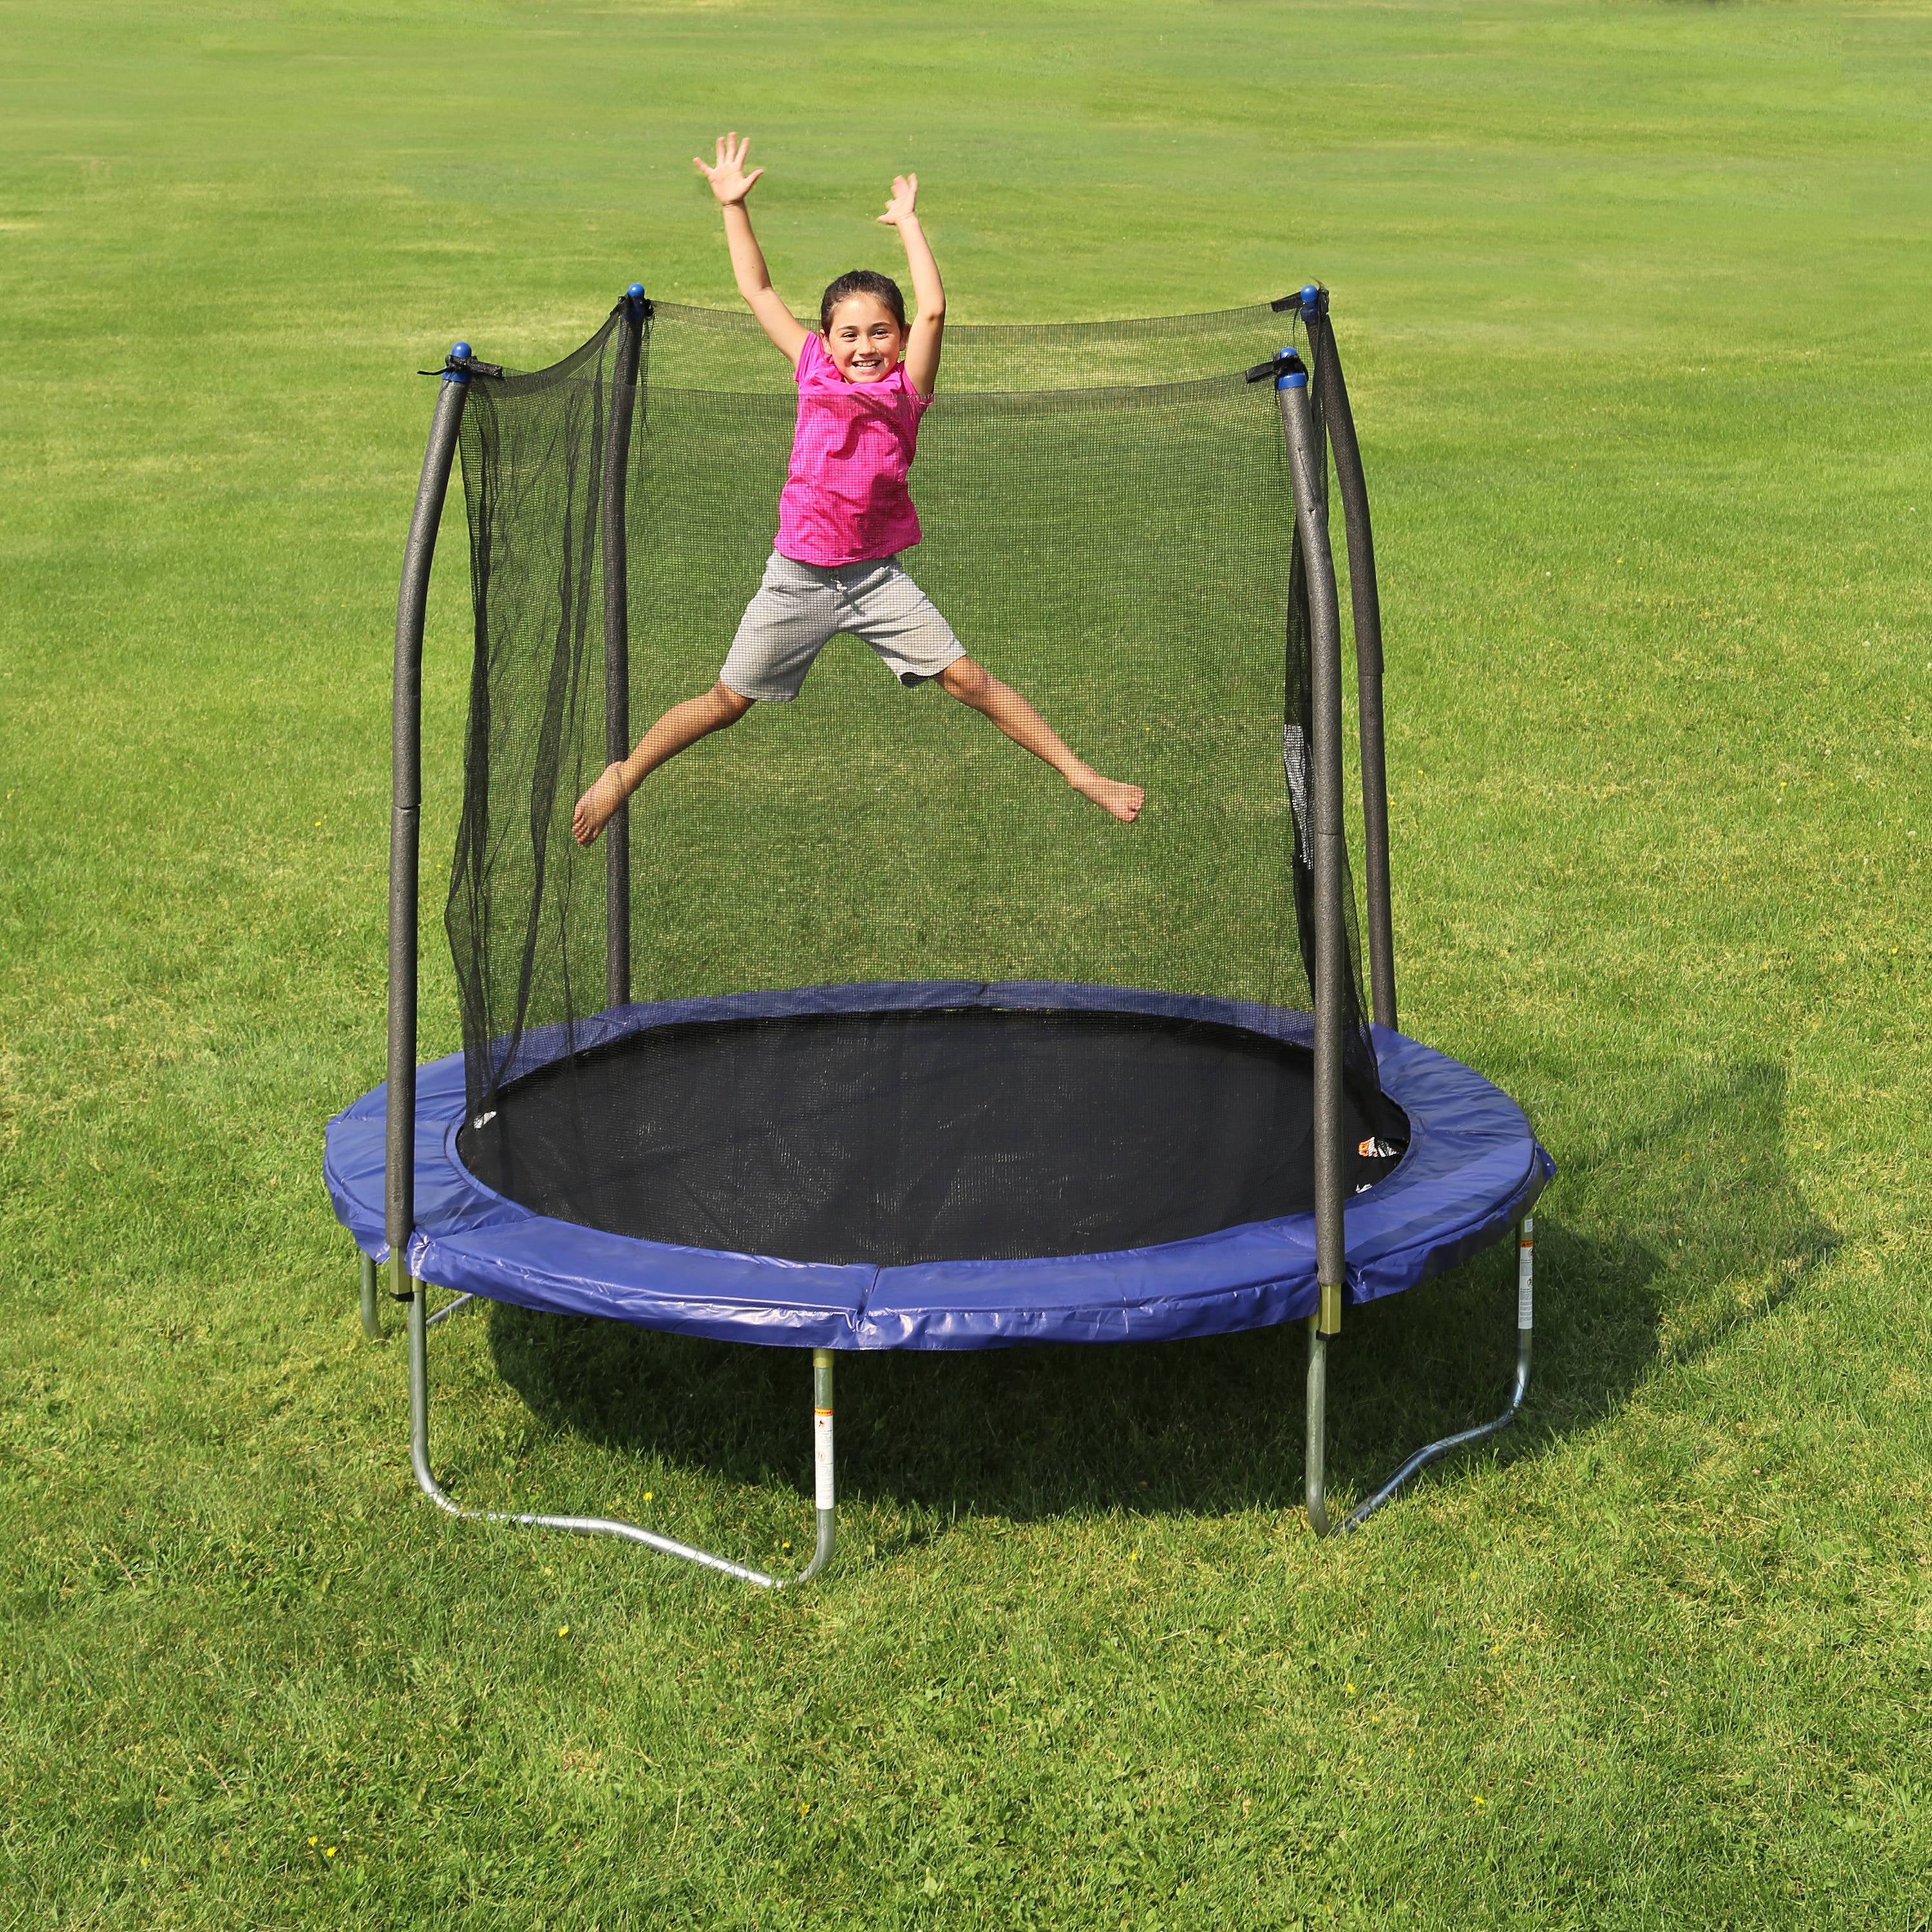 a child jumping on the trampoline